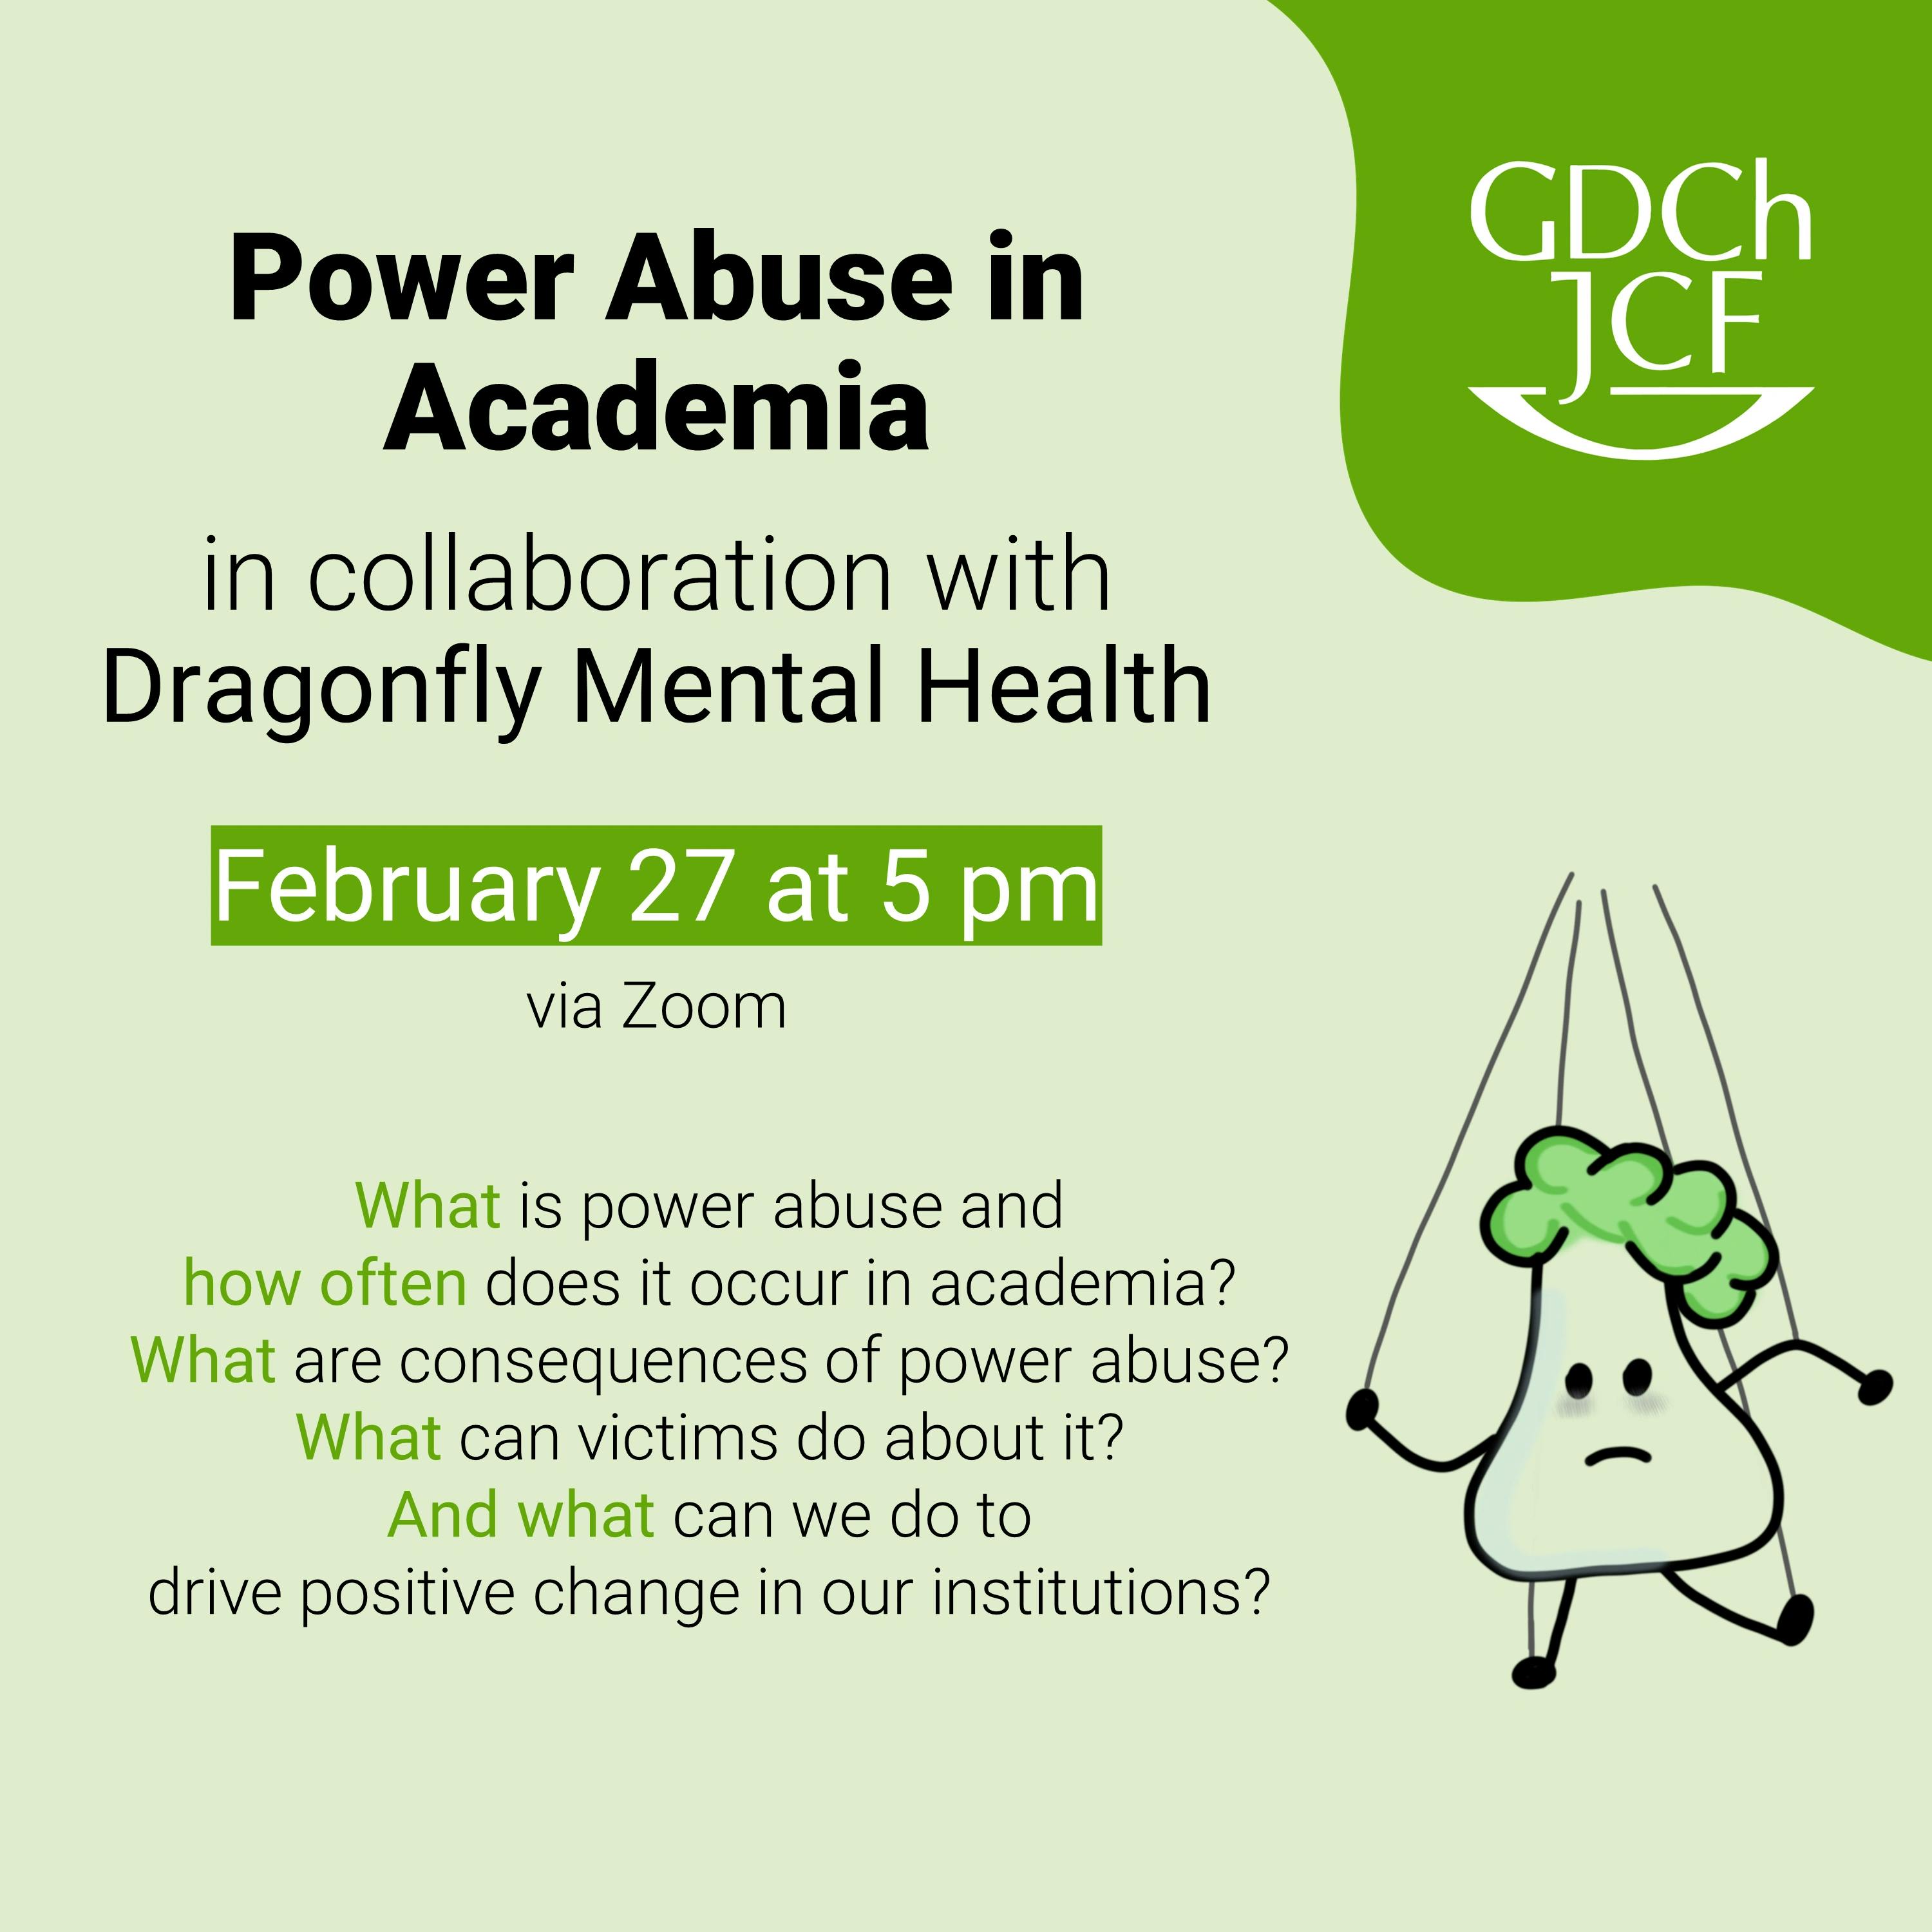 Power Abuse in Academia – what can we do?